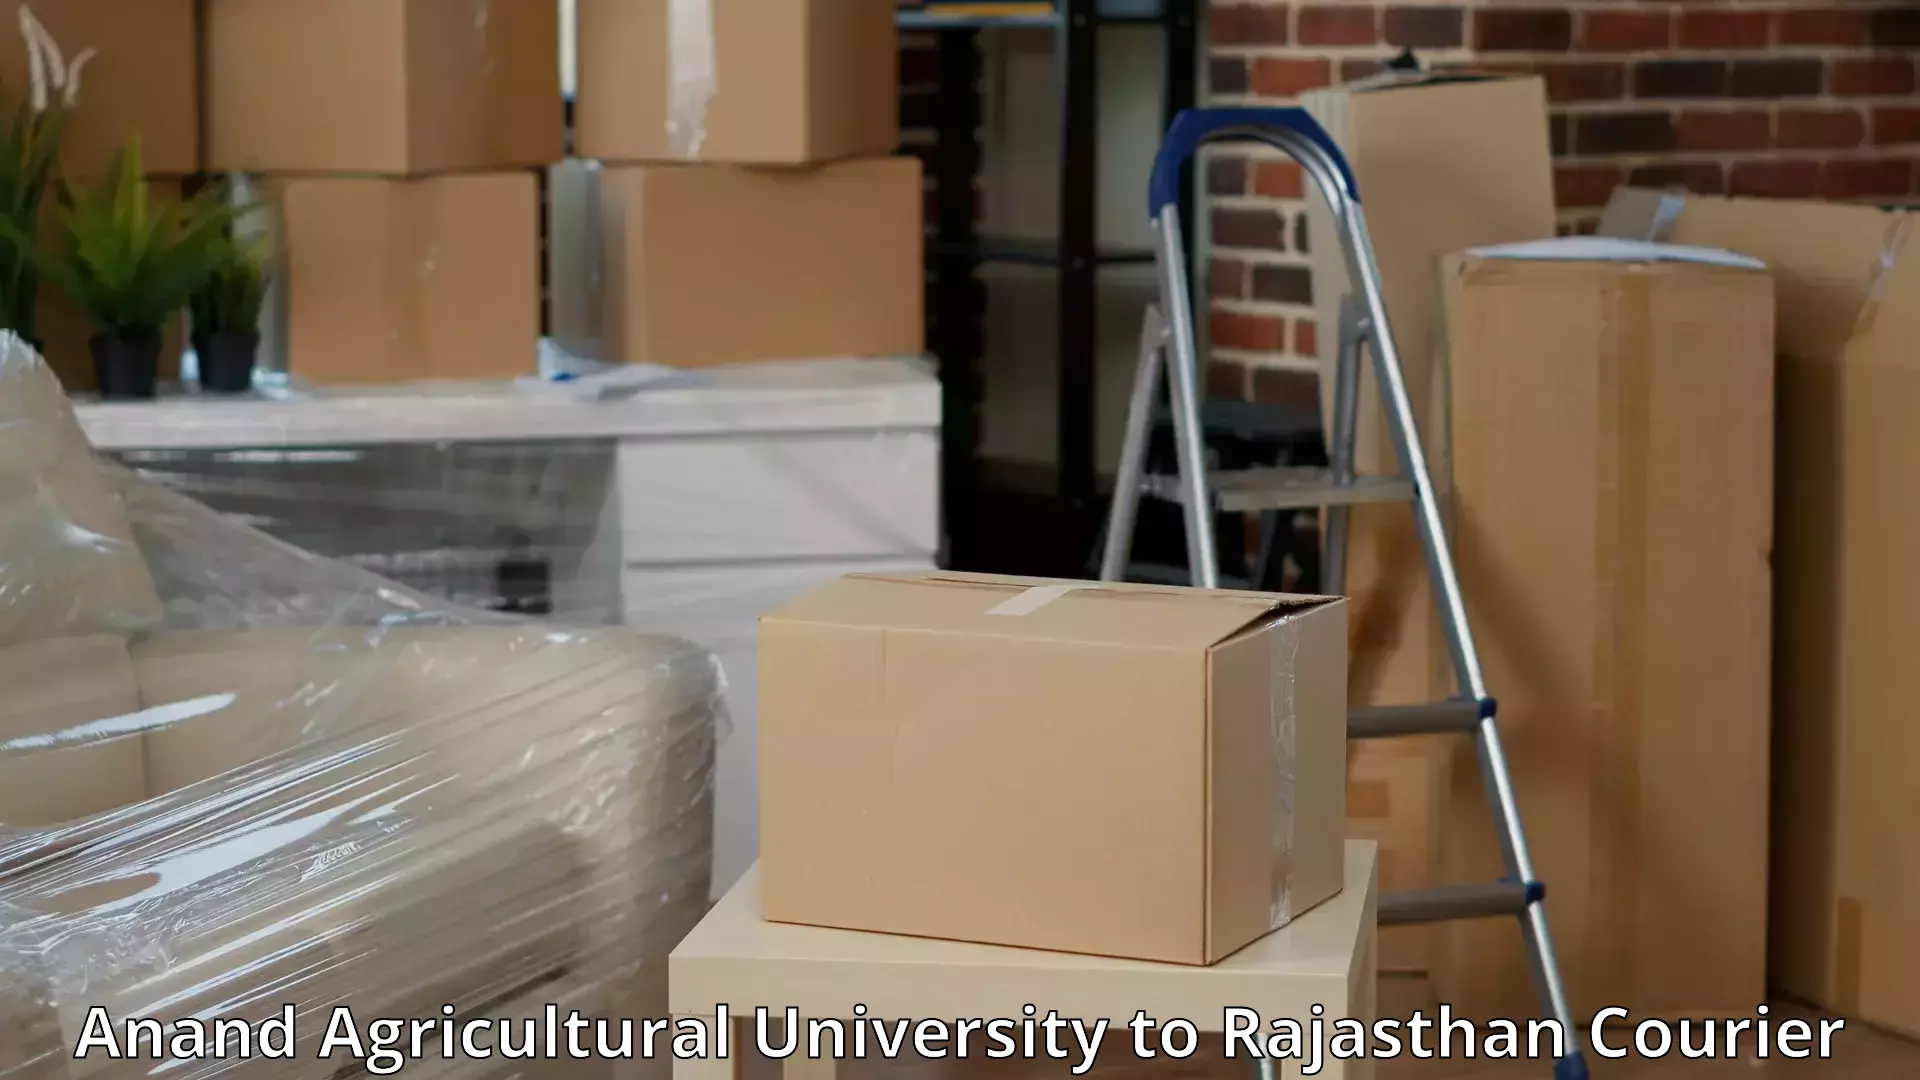 Efficient relocation services Anand Agricultural University to Raipur Pali